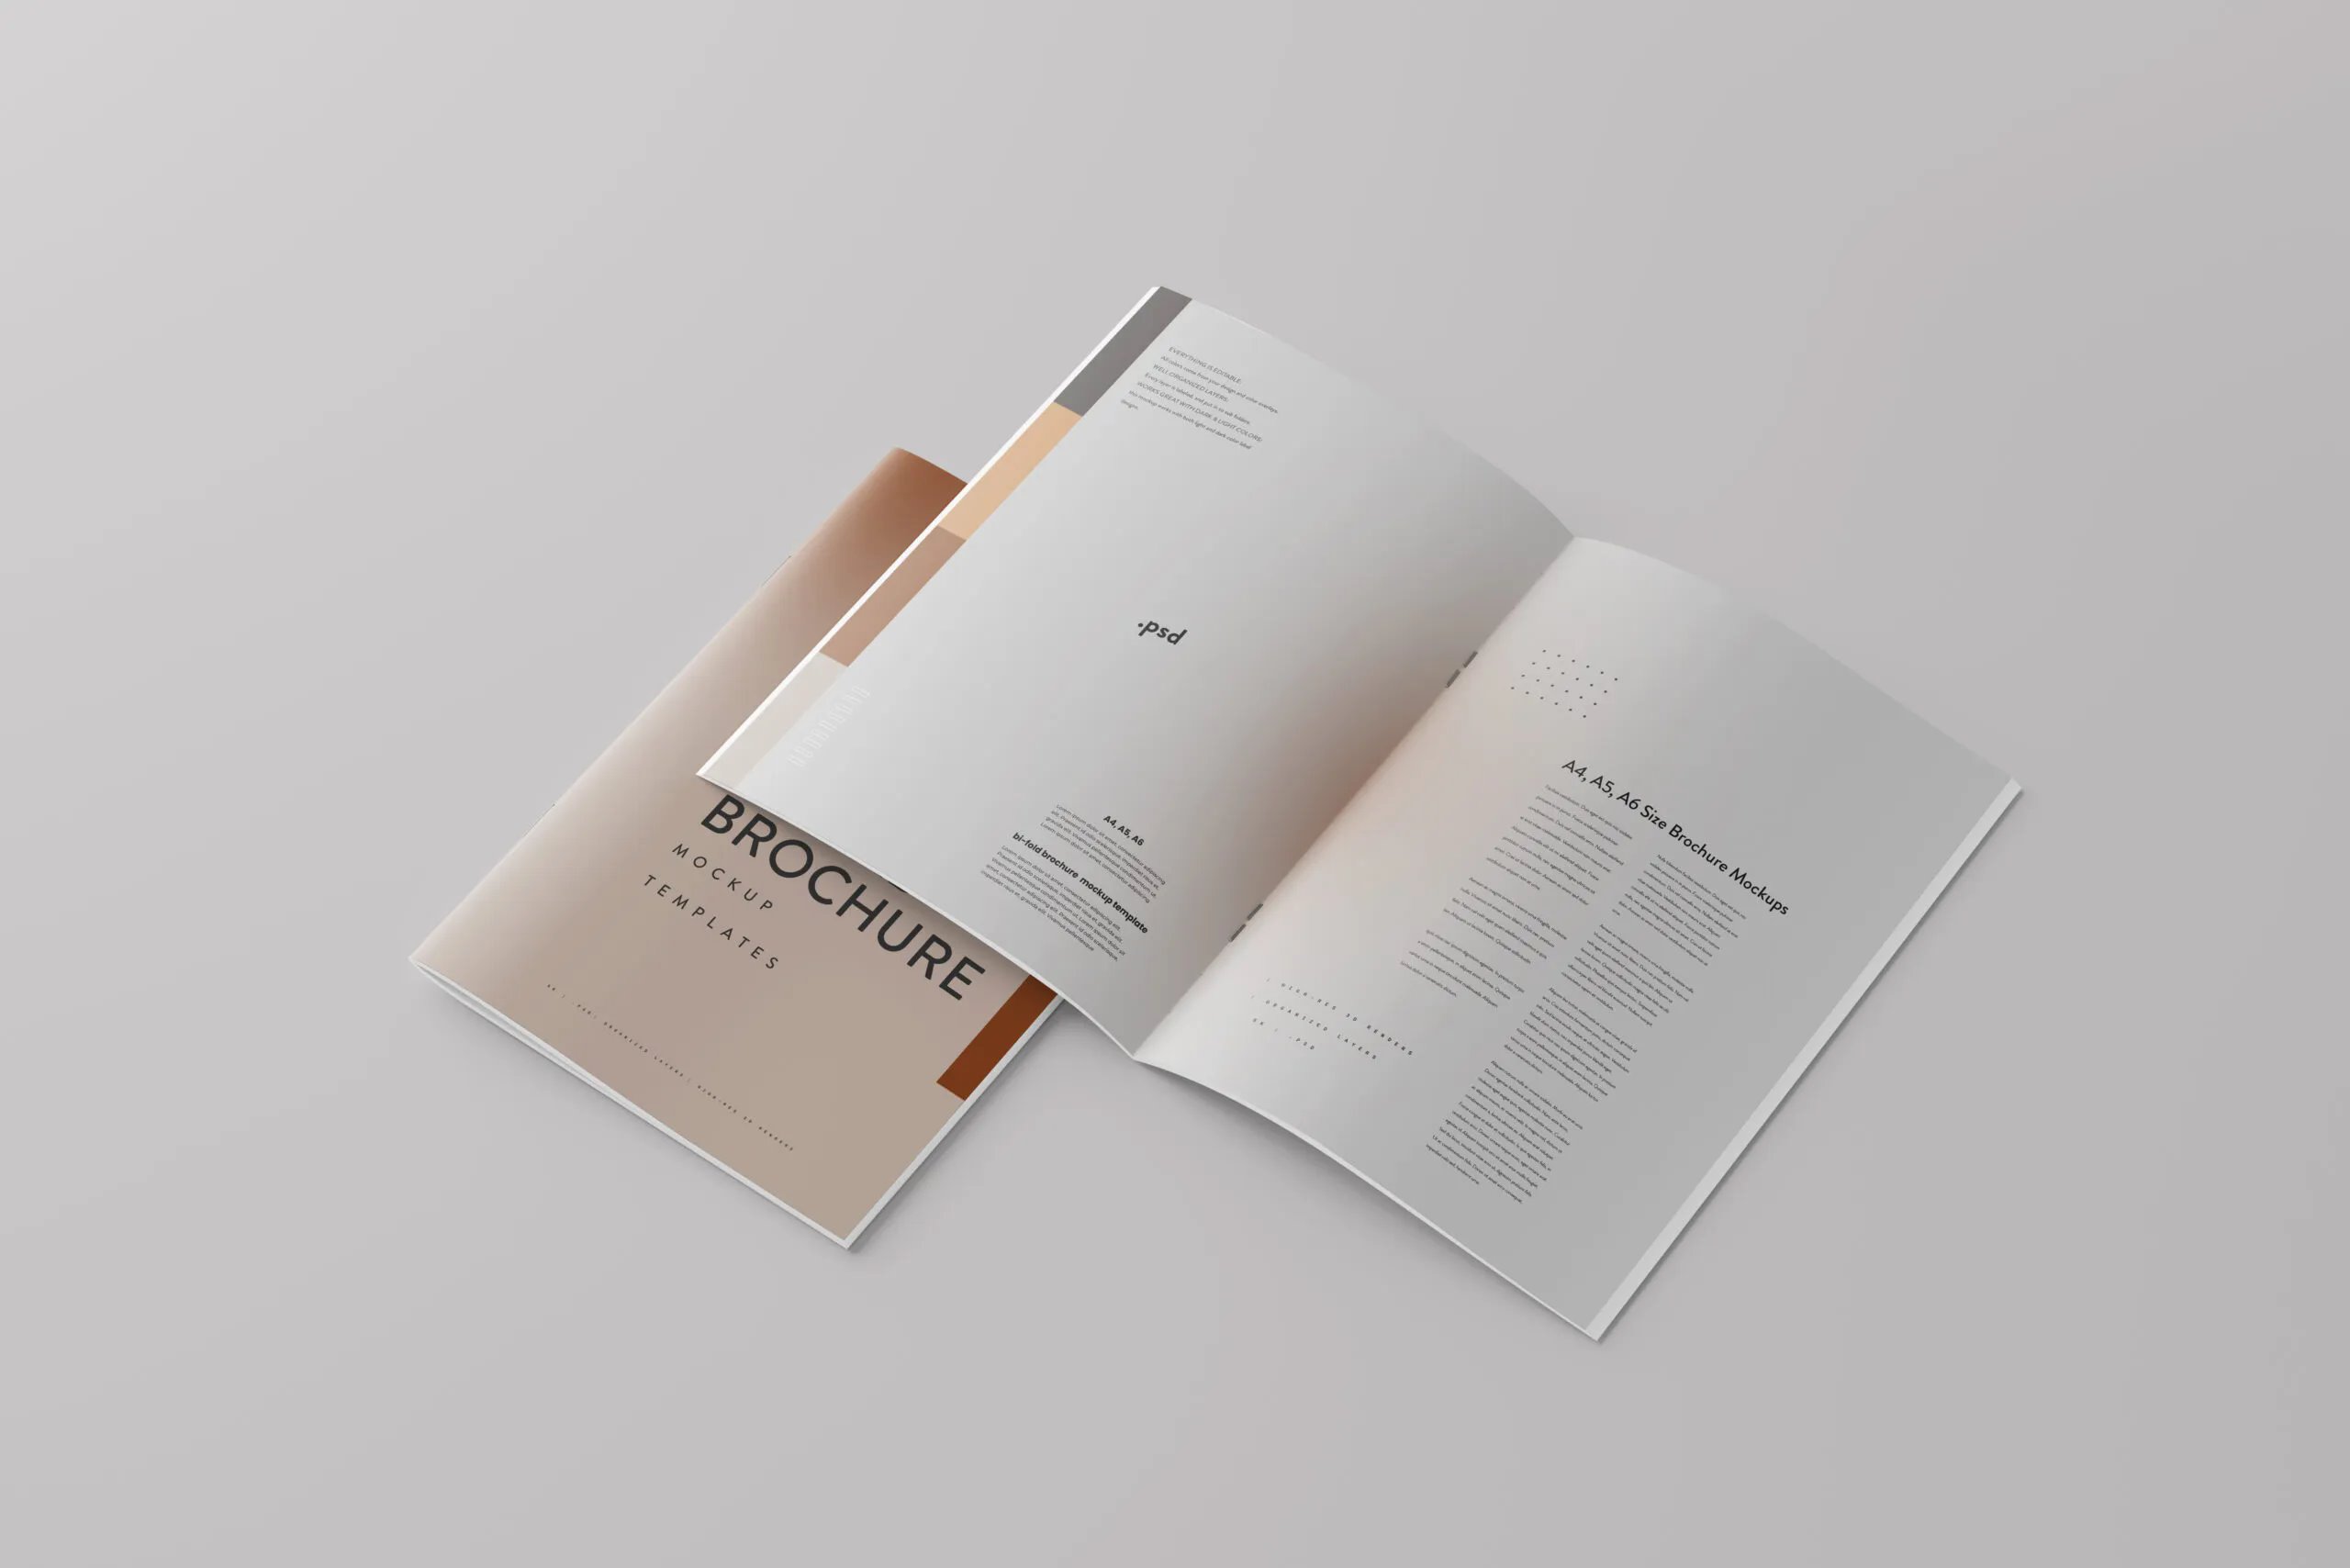 5 Bi Fold Multiple Pages Brochures Mockups in Perspective View FREE PSD